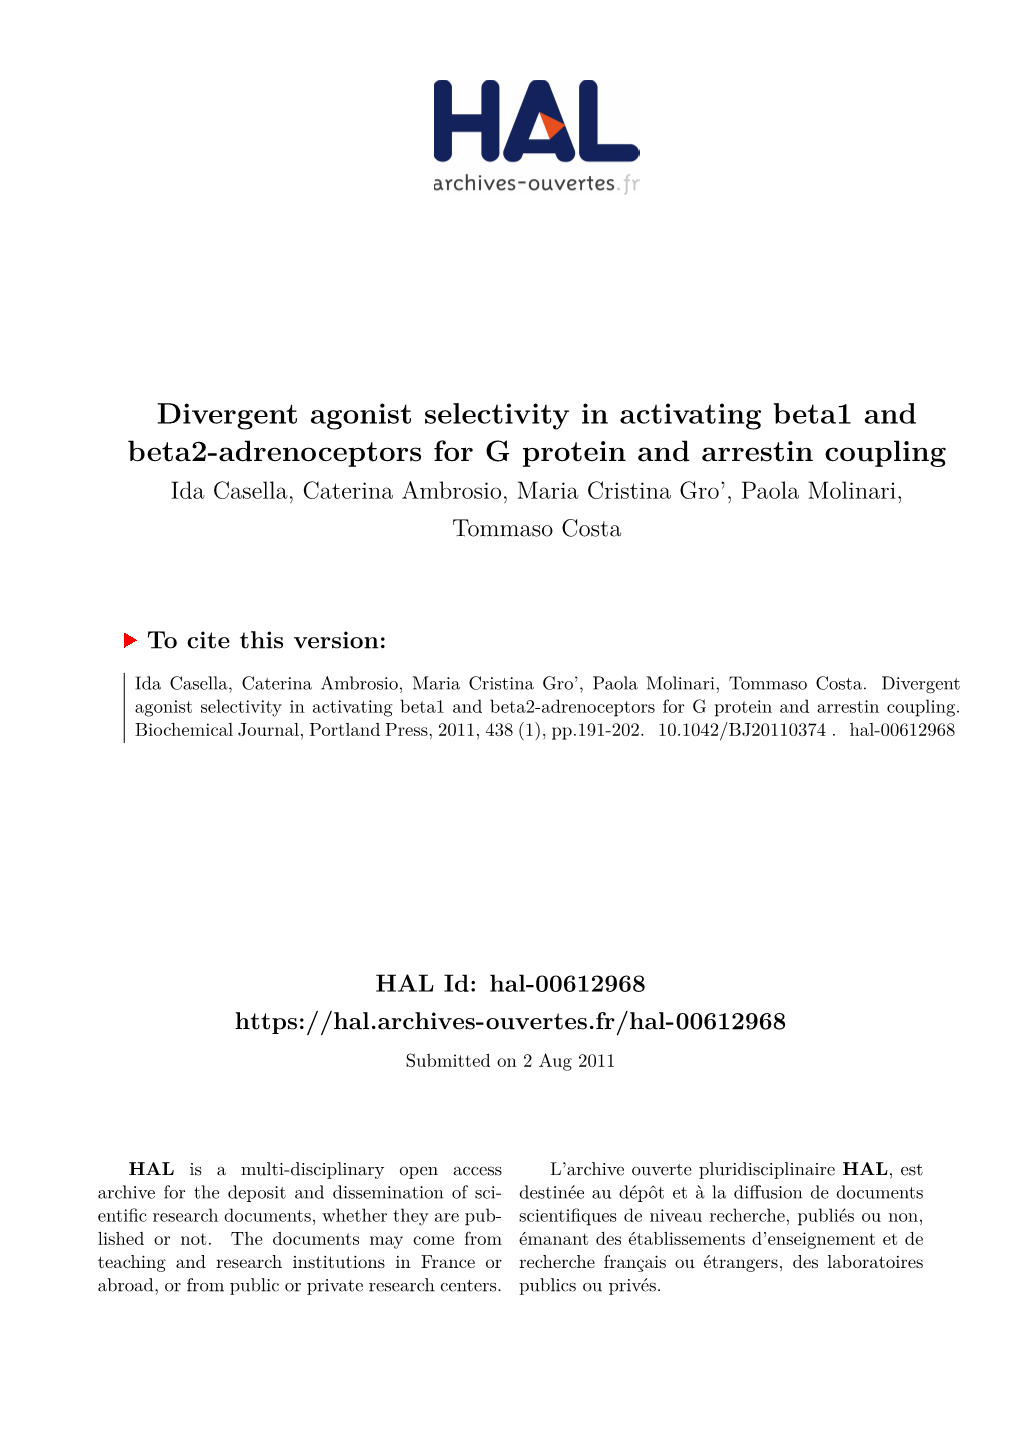 Divergent Agonist Selectivity in Activating Beta1 and Beta2